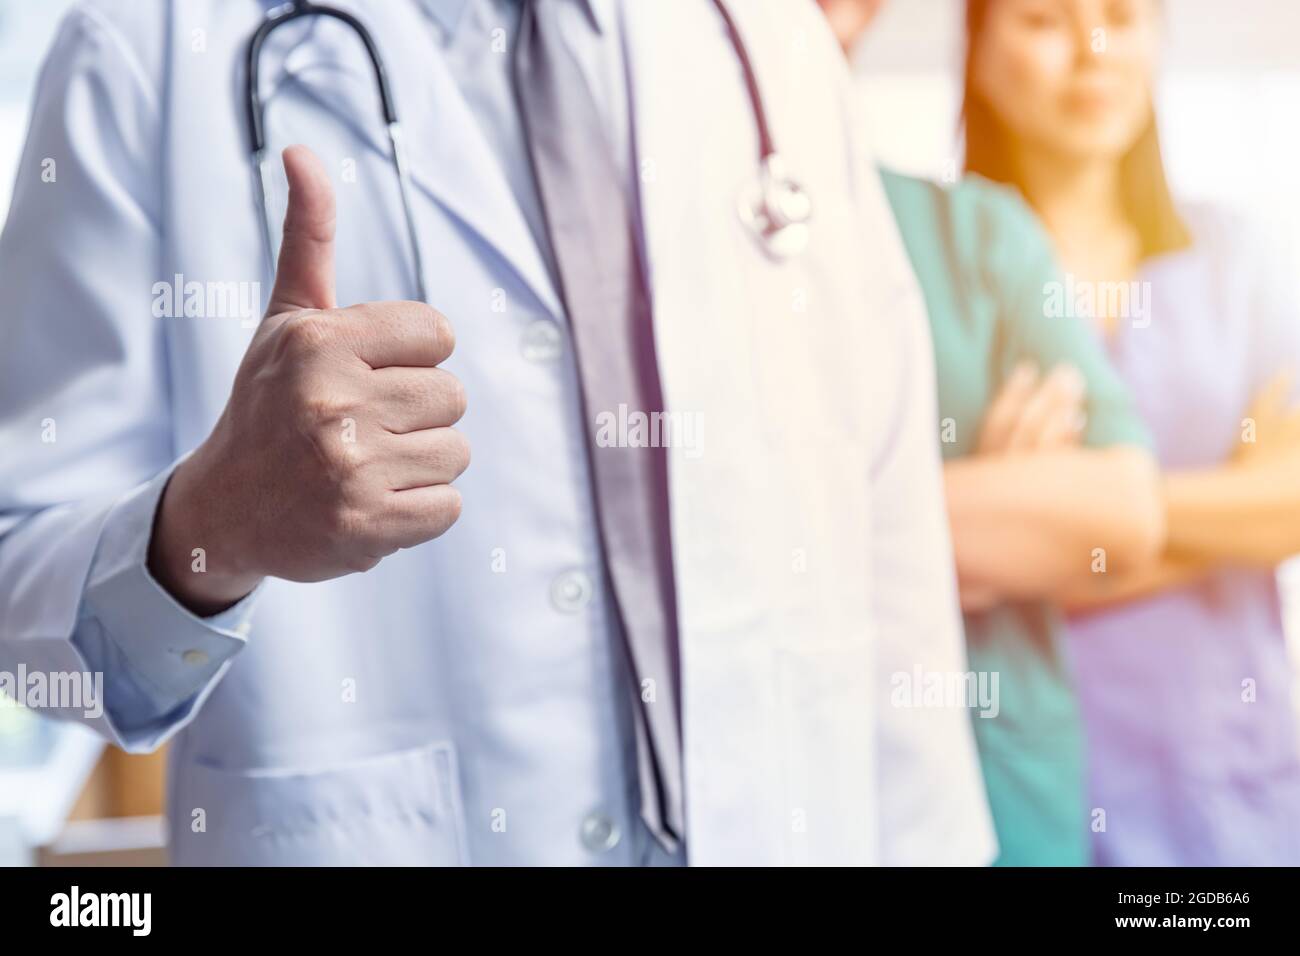 Doctor medical team with hand thumbs up positive sign for good care confirm virus protected service healthcare concept. Stock Photo